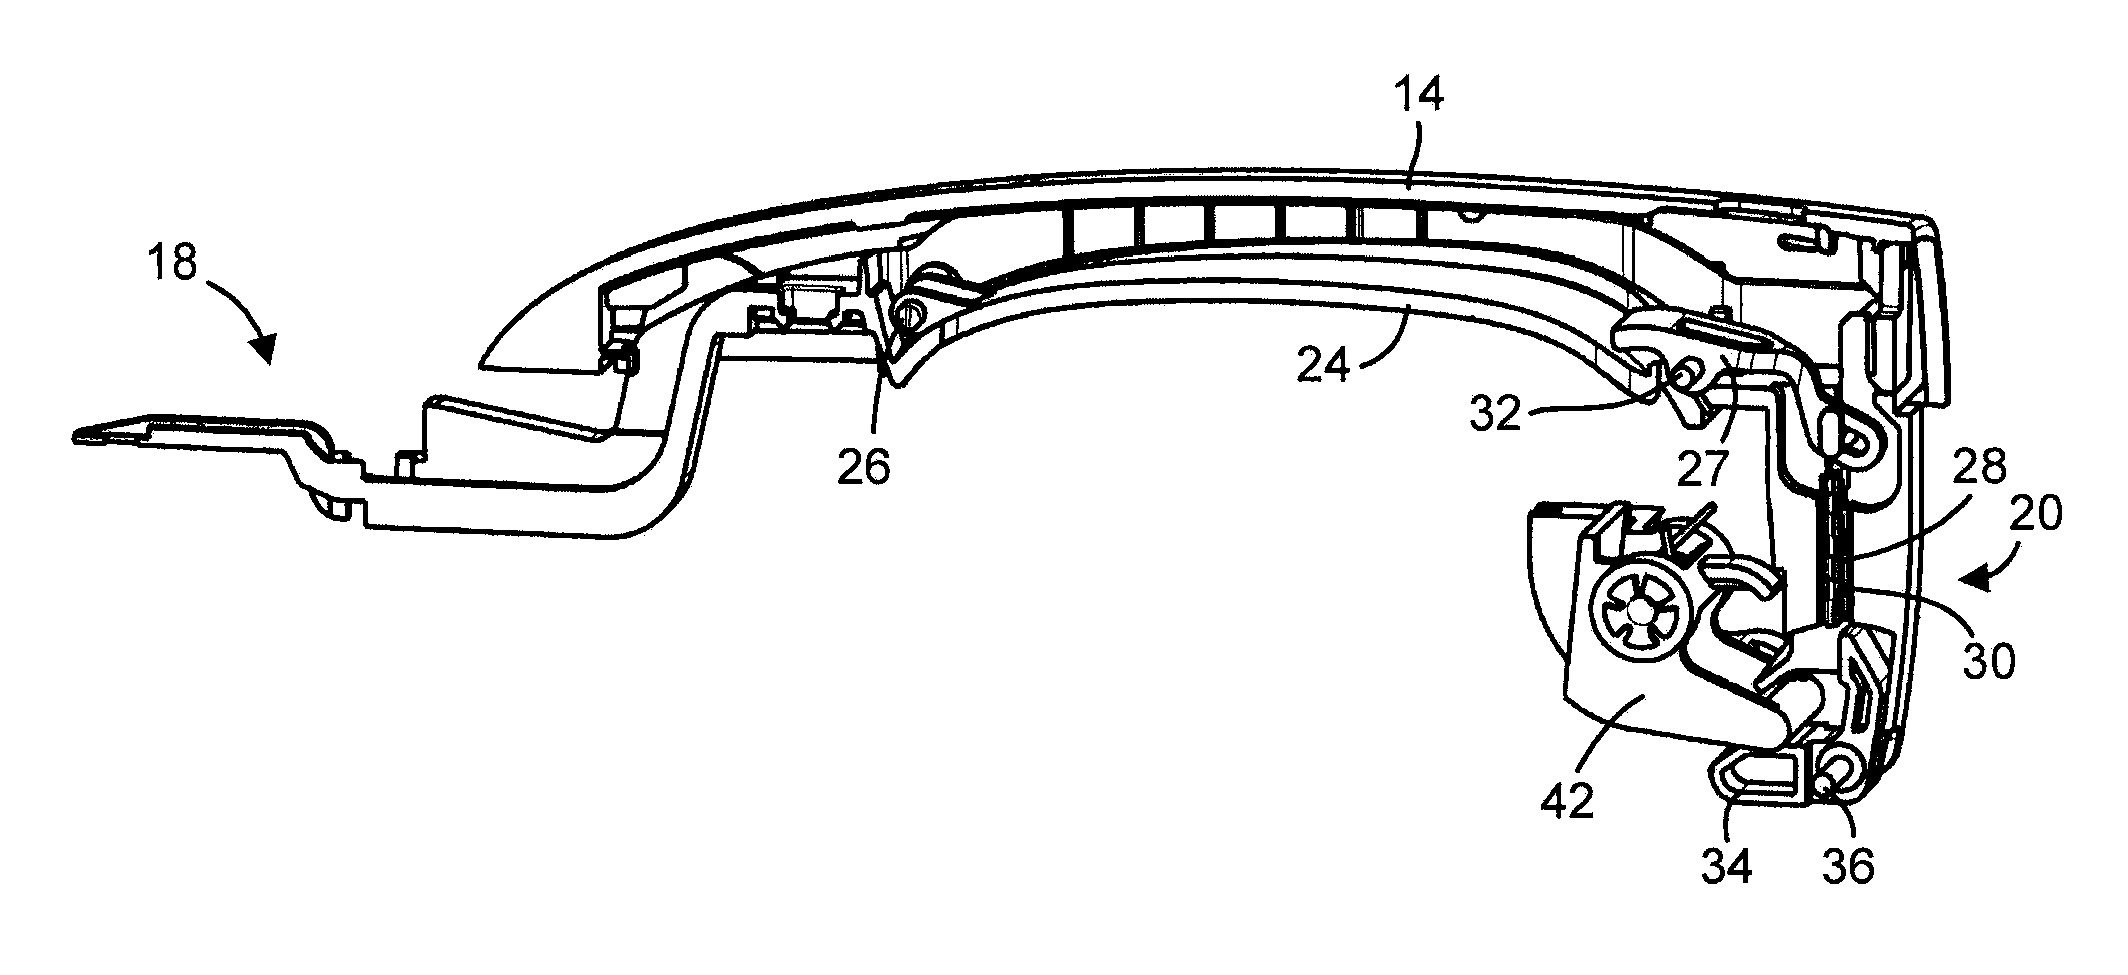 Vehicular door handle assembly with deployable latch connection